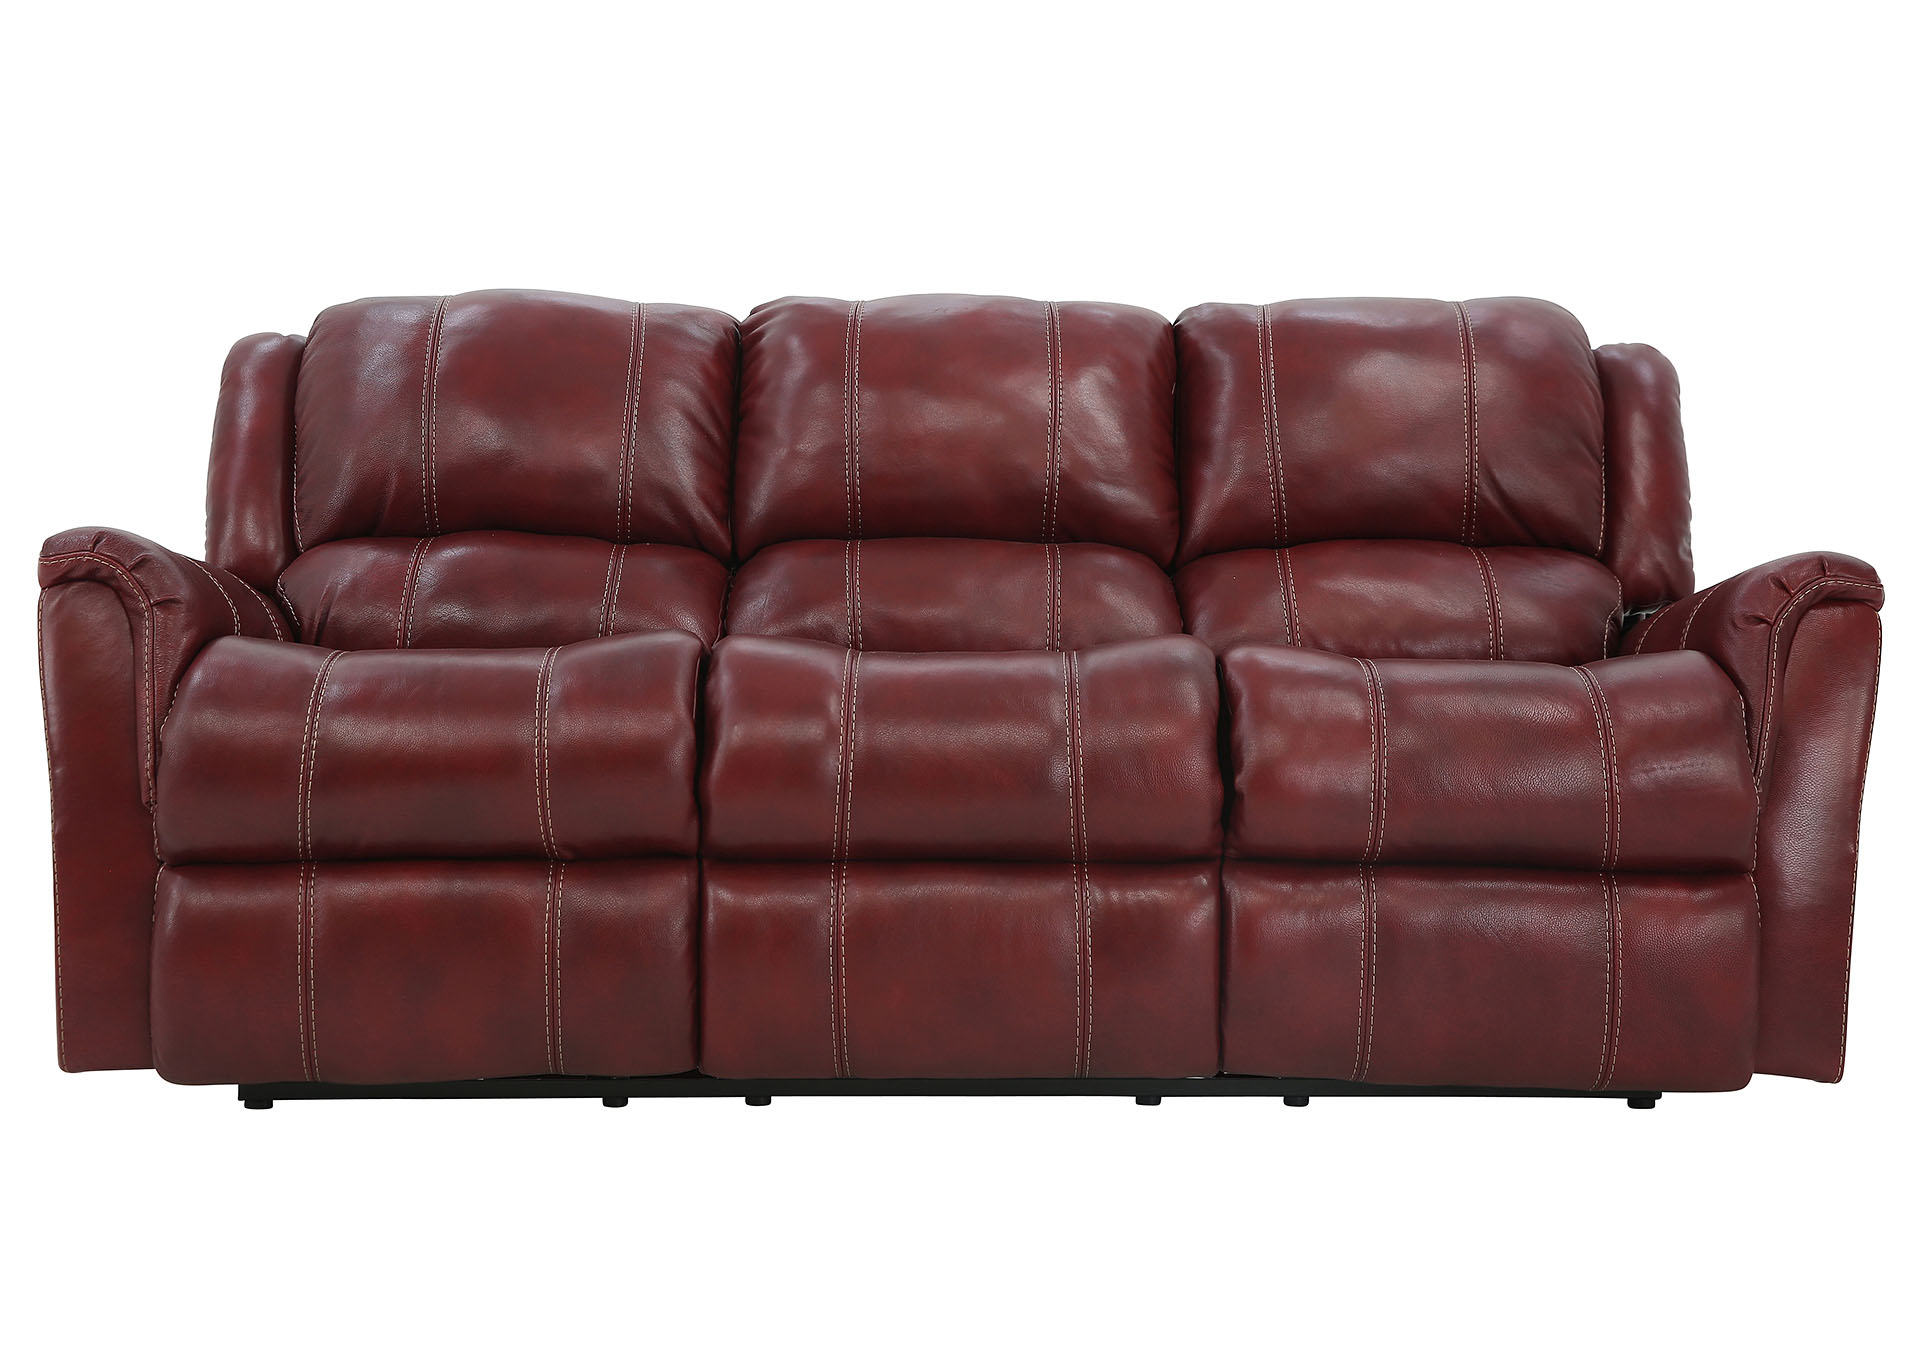 BRYCE RED LEATHER RECLINING SOFA,HOMESTRETCH